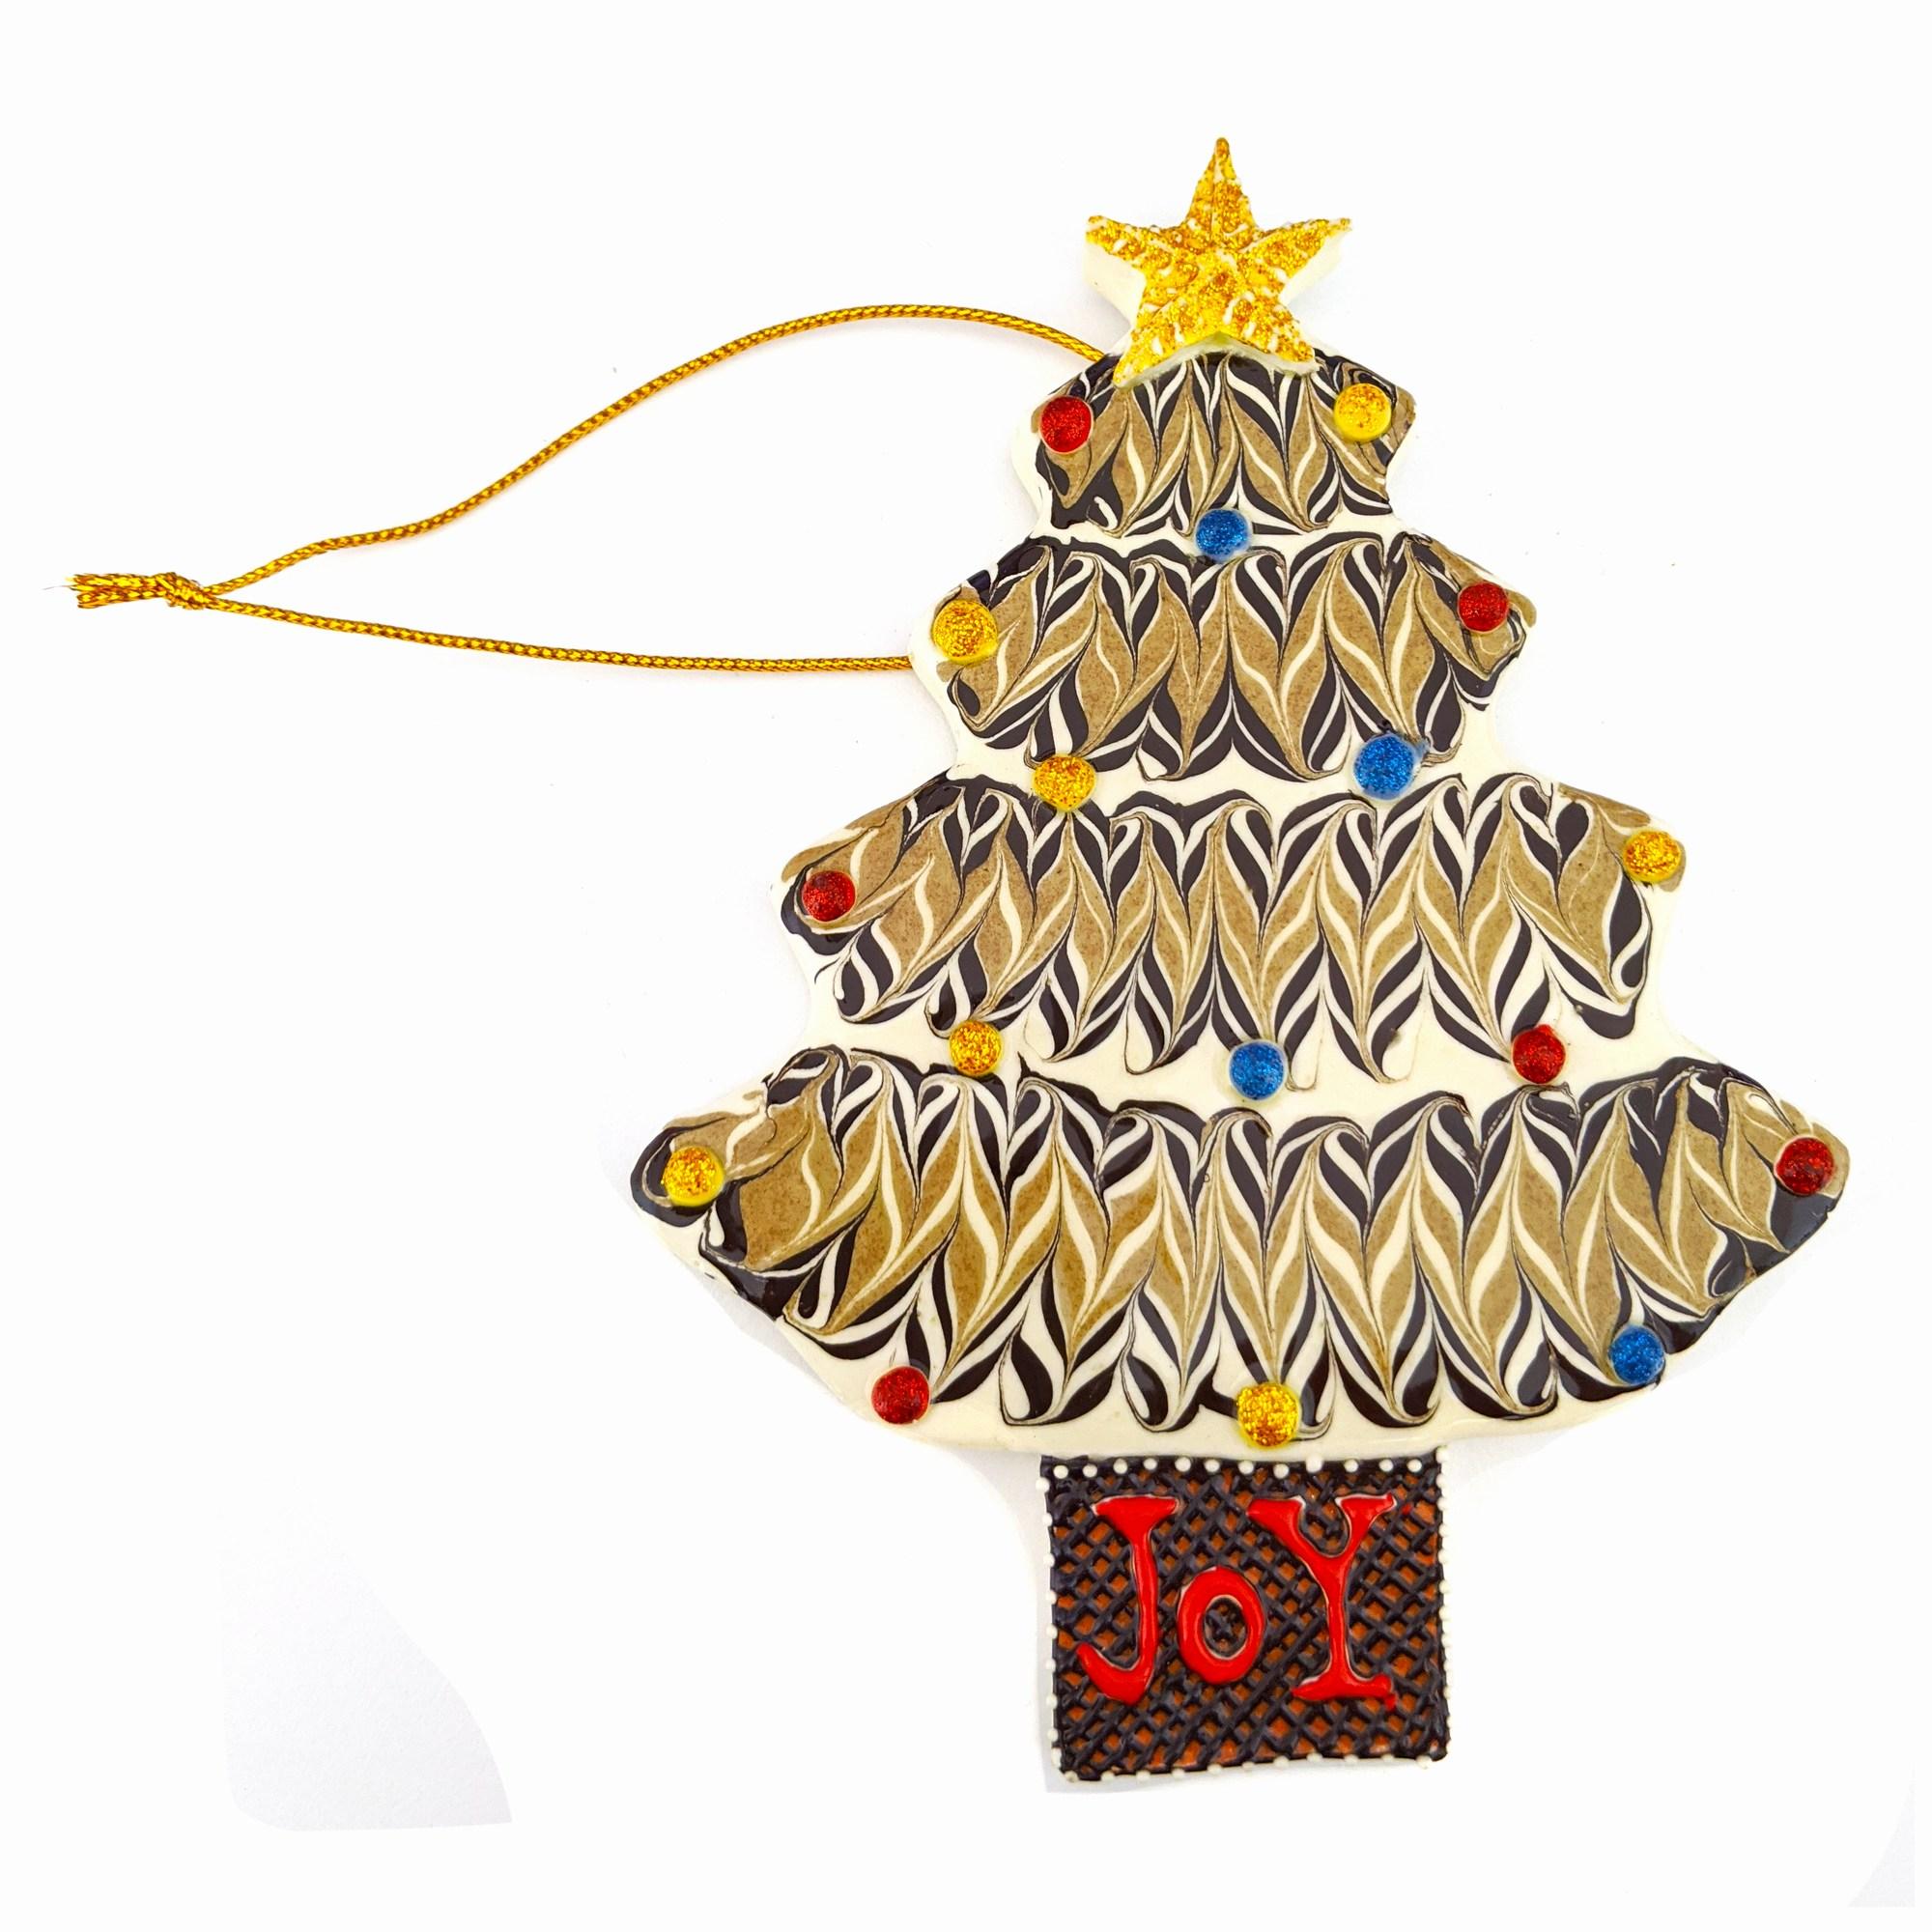 Christmas Tree Ornament "JOY" (from the Christmas Series) - Art by Irma Starr